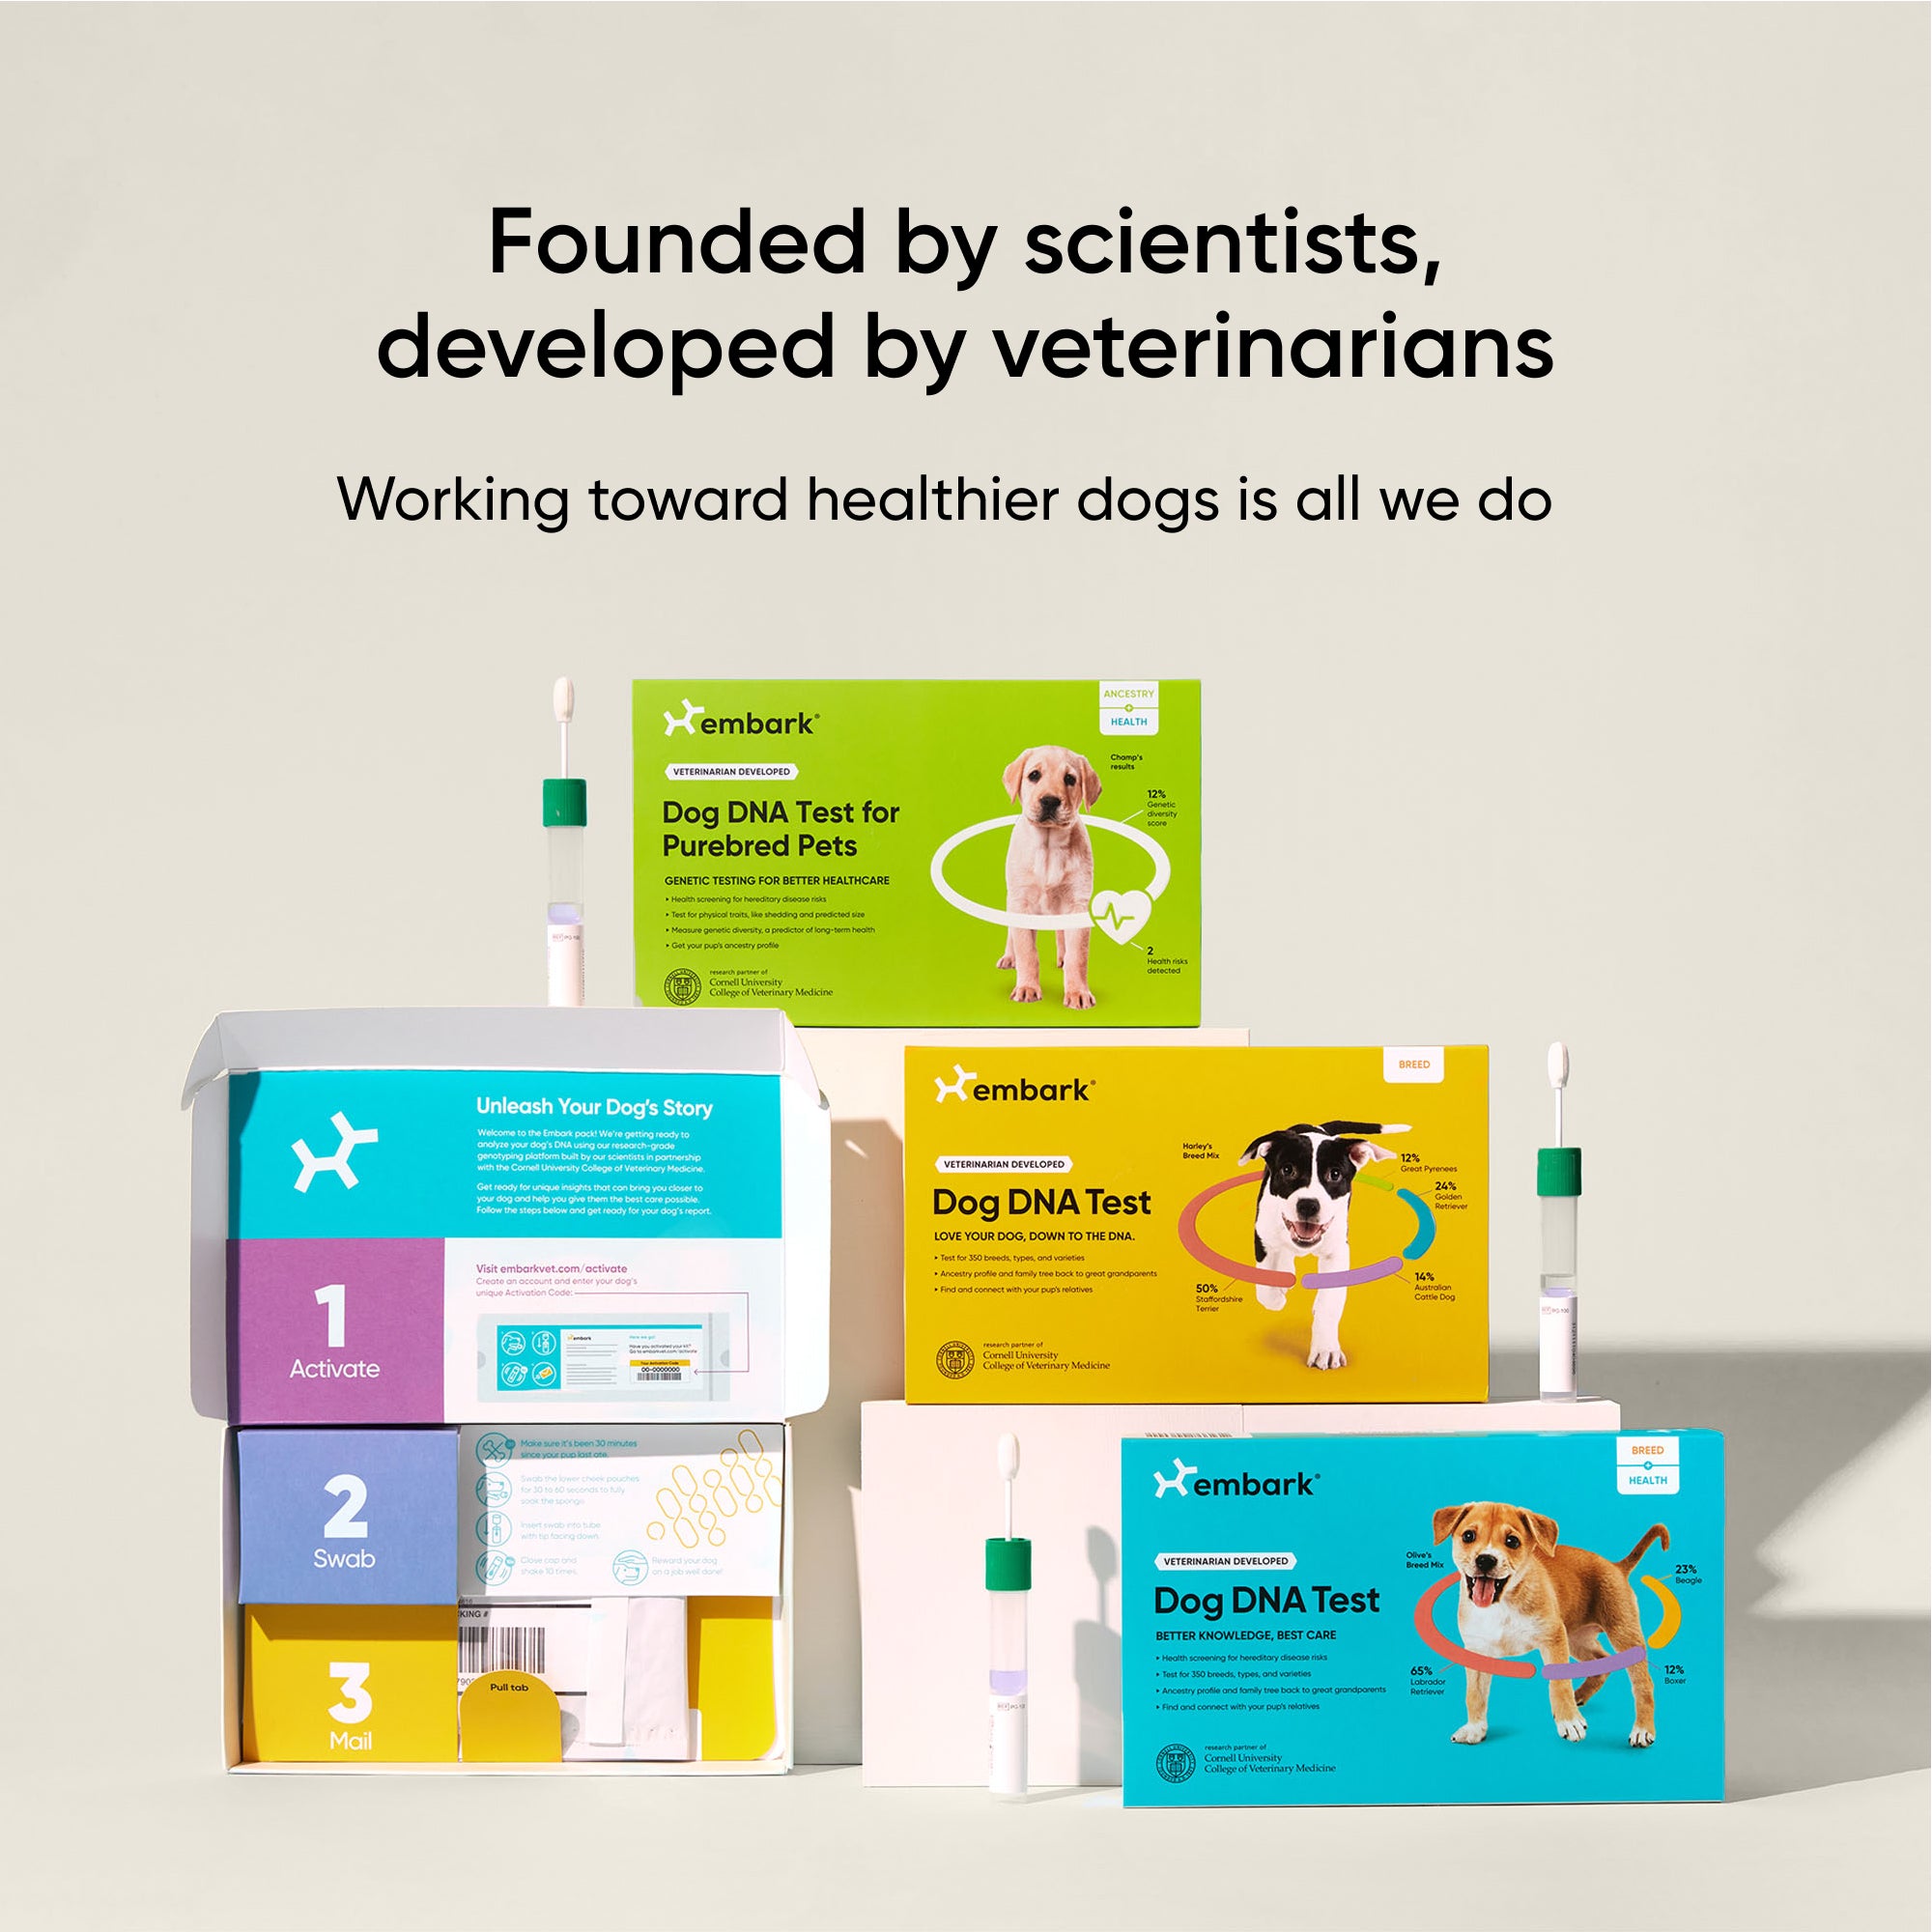 Embark Dog DNA Test: Their best life starts with Embark.